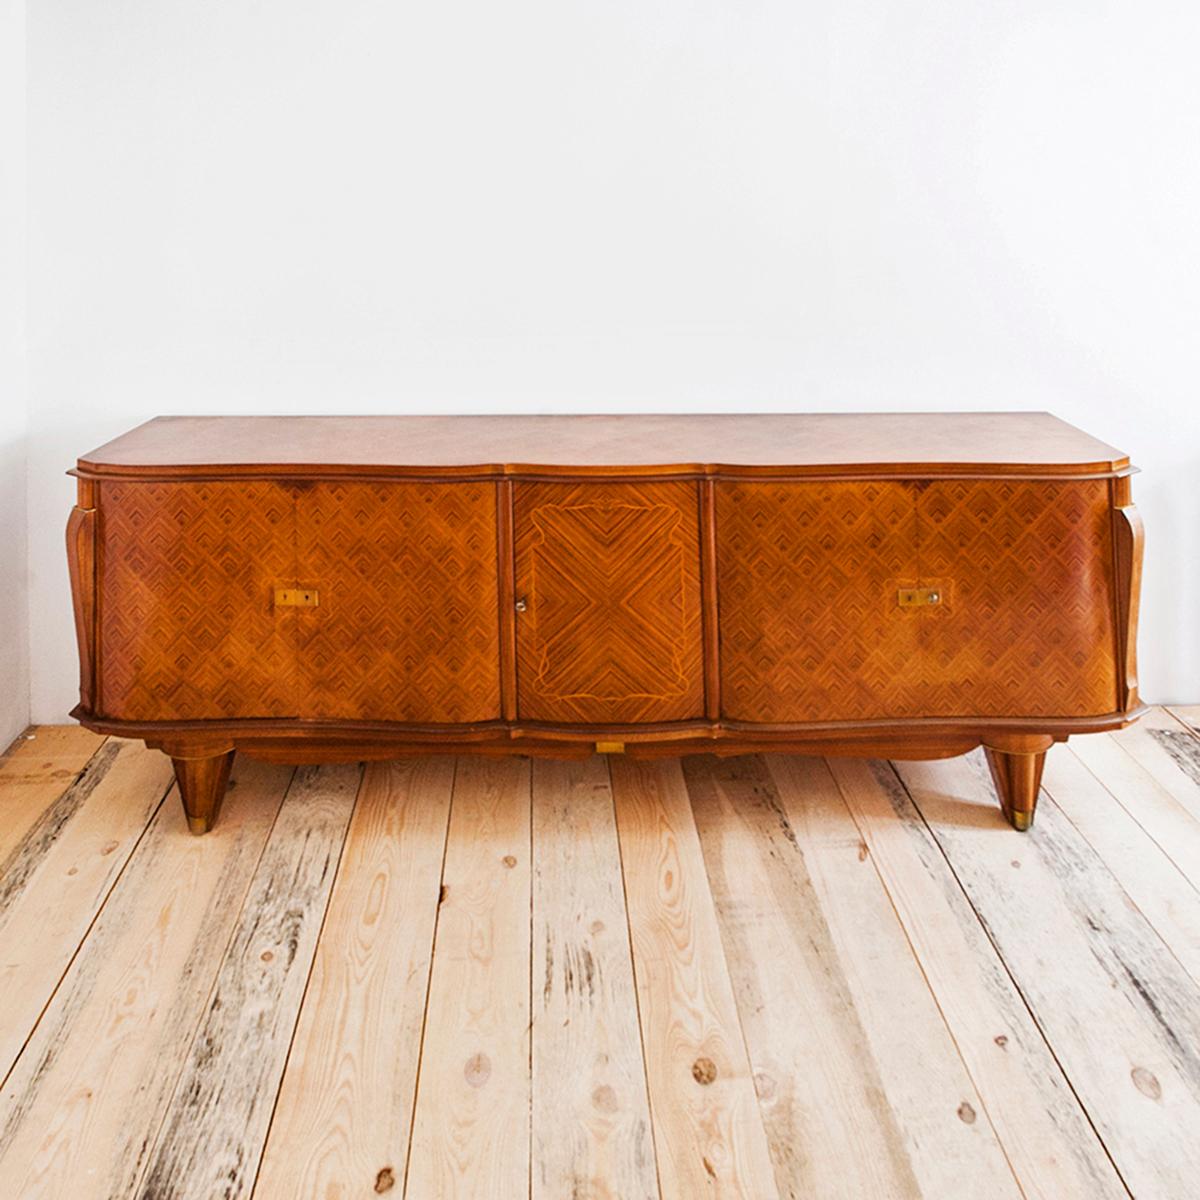 Jules Leleu French rosewood diamond Marquetry Art Deco sideboard, 1940's

This French Art Deco sideboard originates from the 1940s, It was produced by Maison Jules Leleu and is made from rosewood and mahogany. It has five doors, the central one